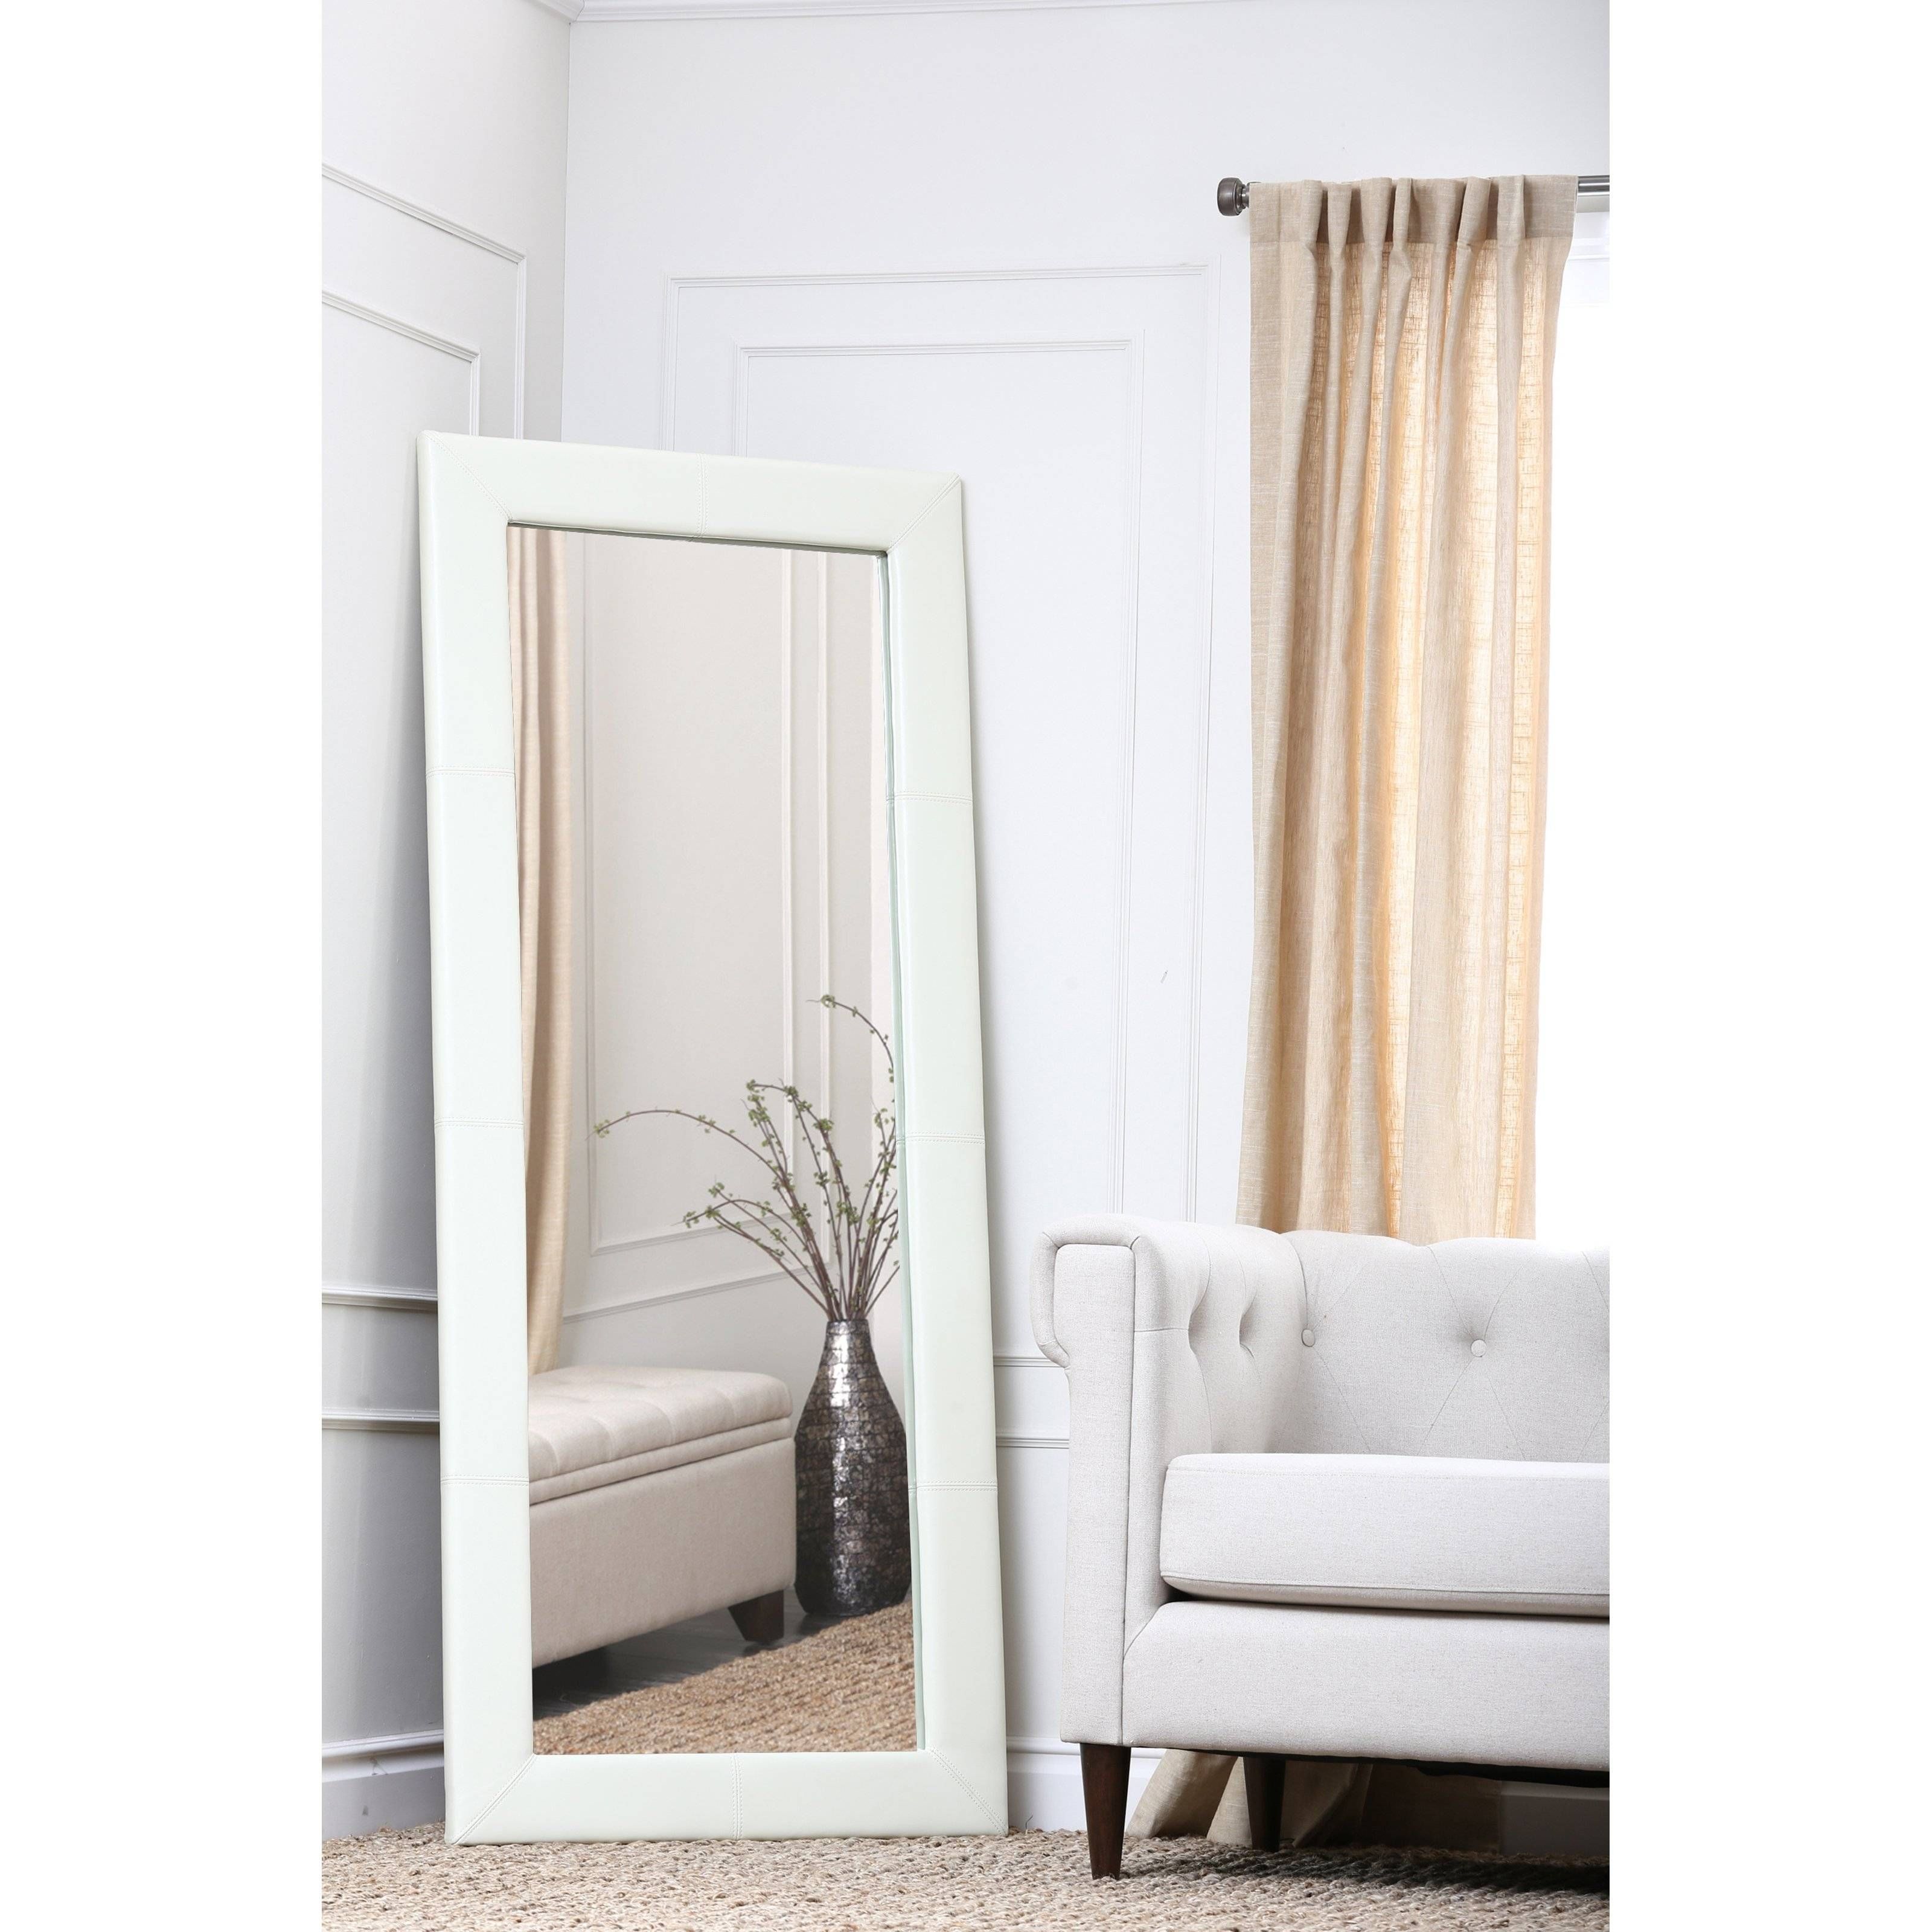 Furniture: Mesmerizing Oversized Floor Mirror For Home Furniture With Regard To Leather Wall Mirrors (View 25 of 25)